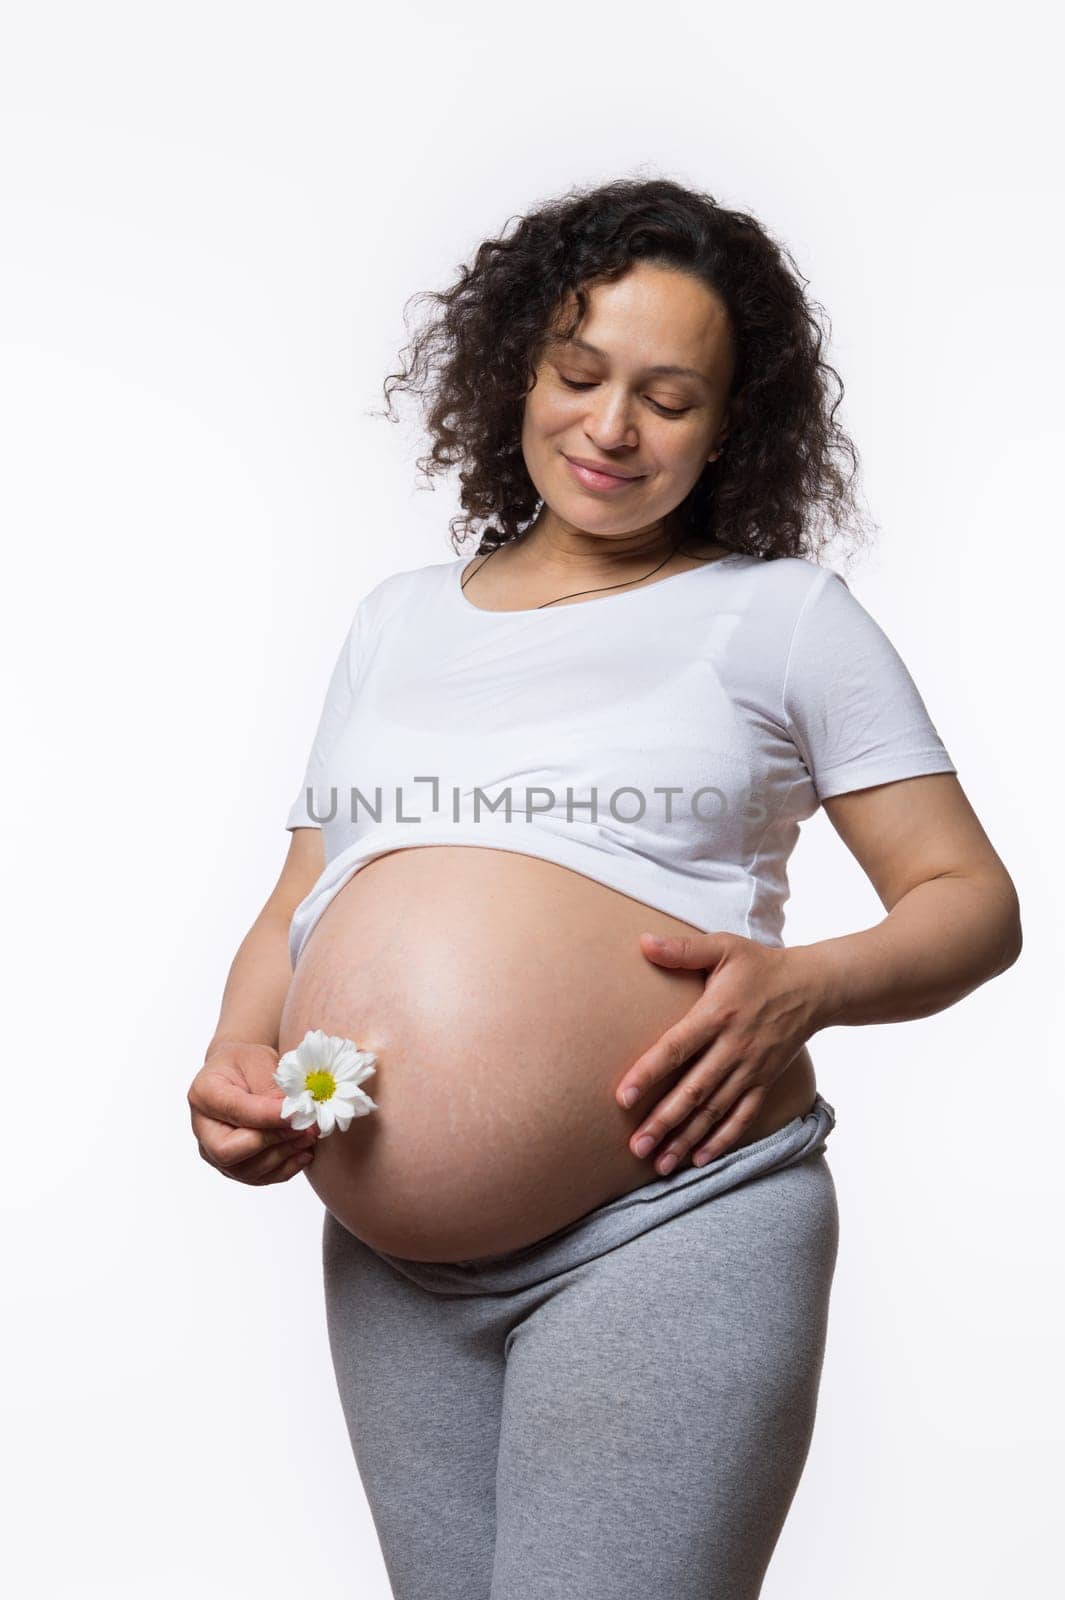 Charming Latina gravid mother holding daisy flower near her pregnant belly, isolated on white background. Women's health by artgf